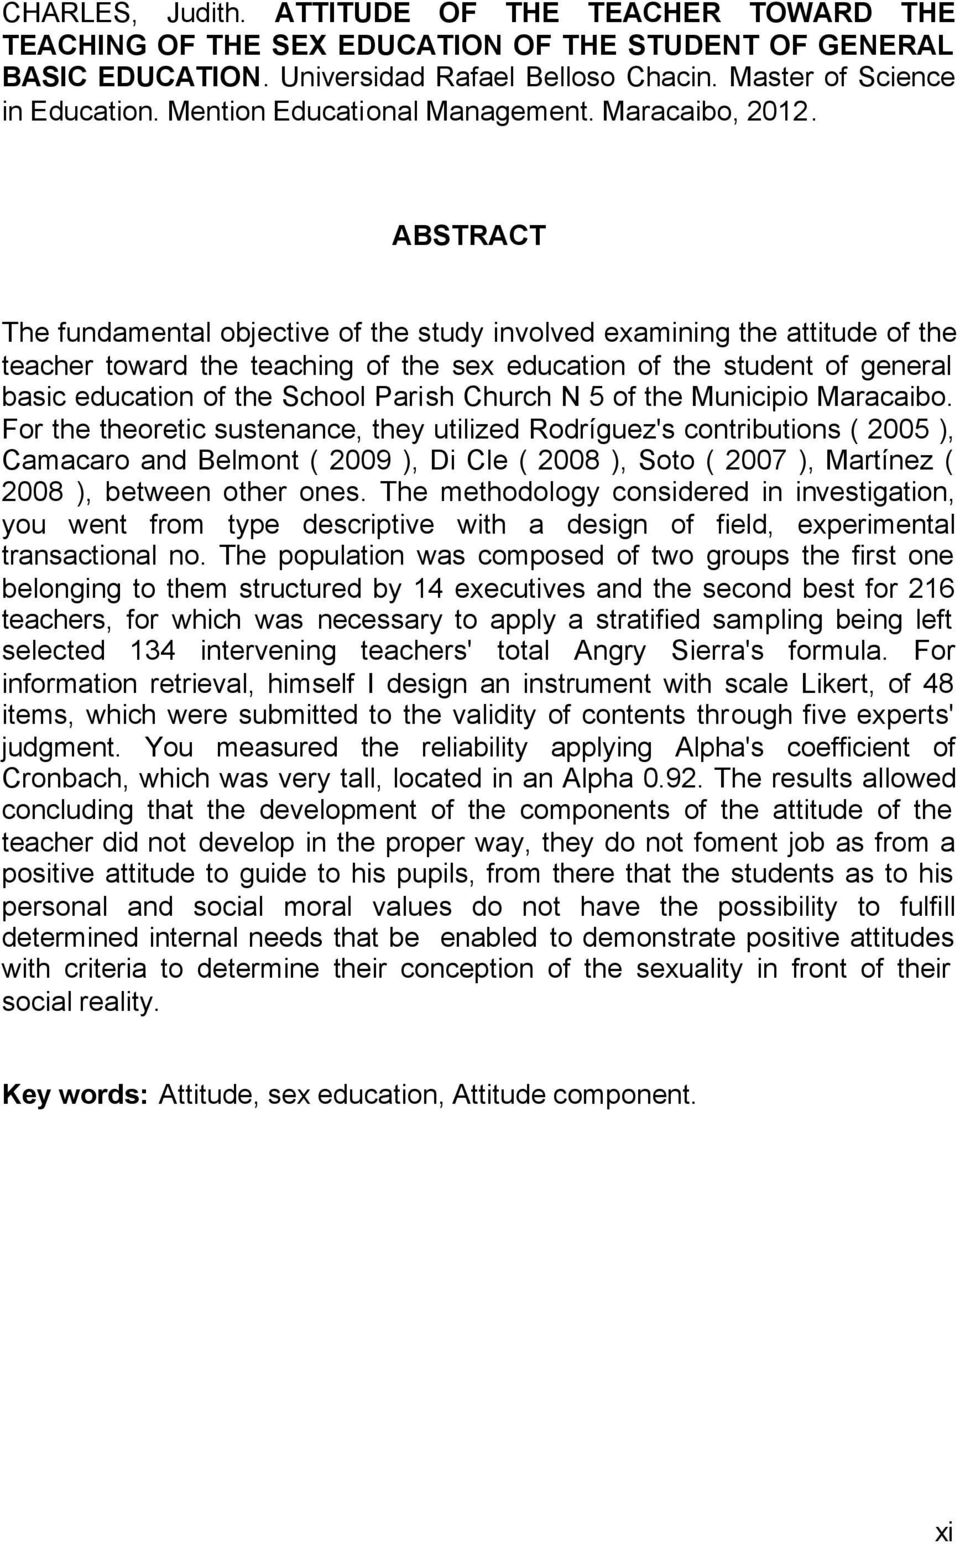 ABSTRACT The fundamental objective of the study involved examining the attitude of the teacher toward the teaching of the sex education of the student of general basic education of the School Parish